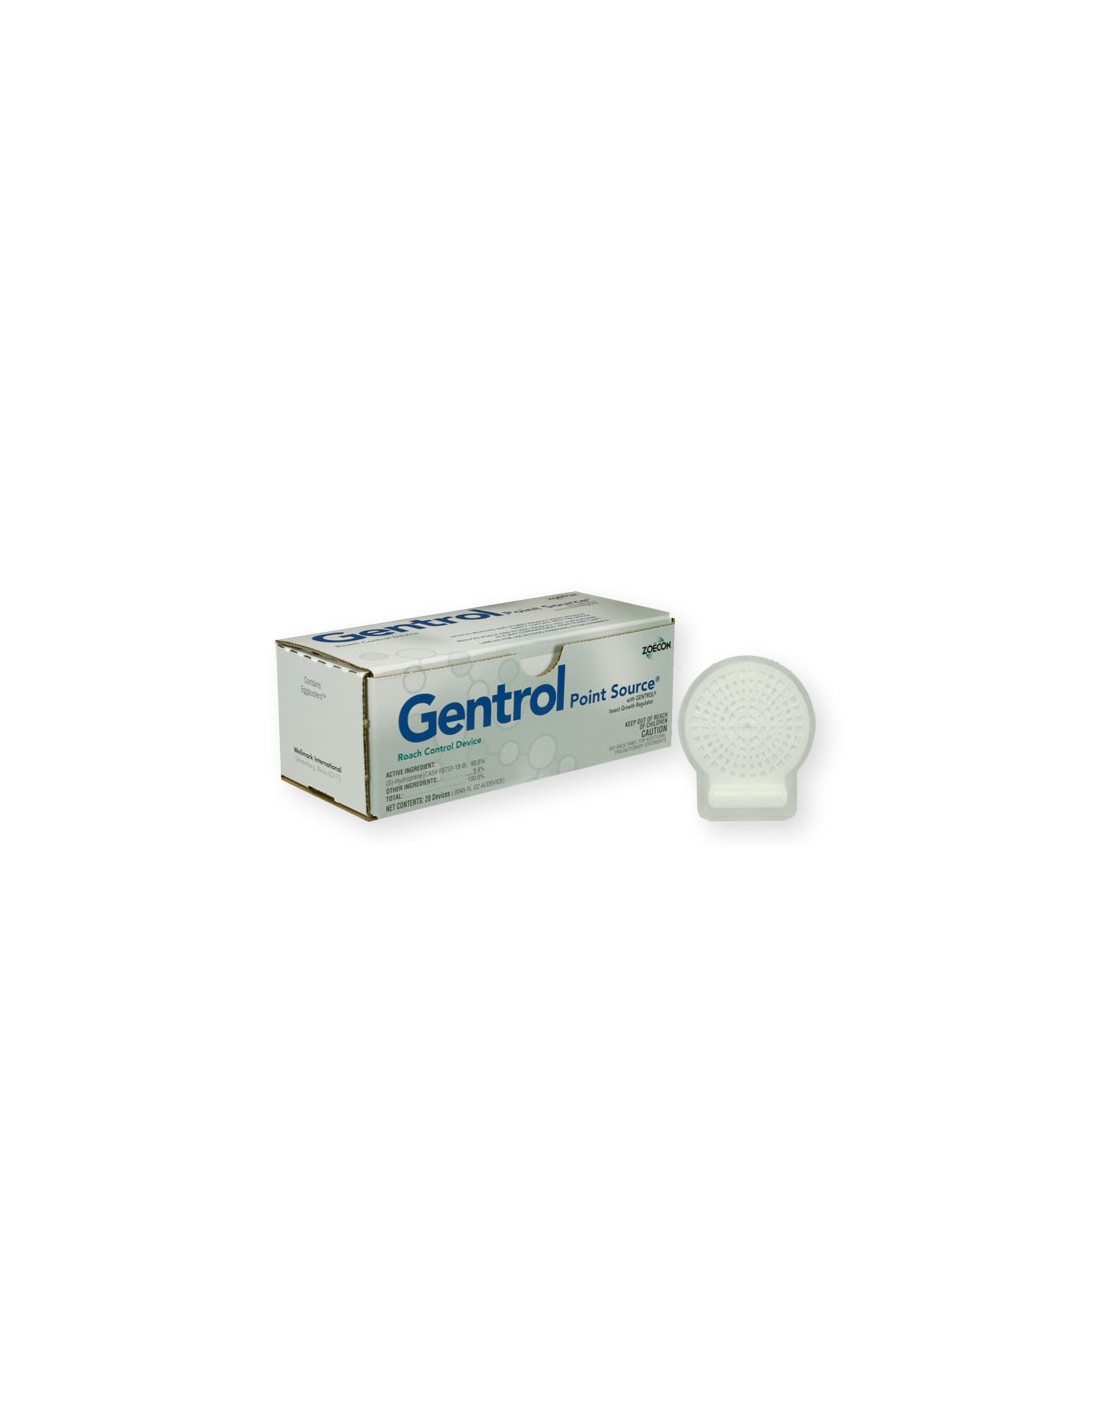 Gentrol Point Source Roach Control Disk Questions & Answers